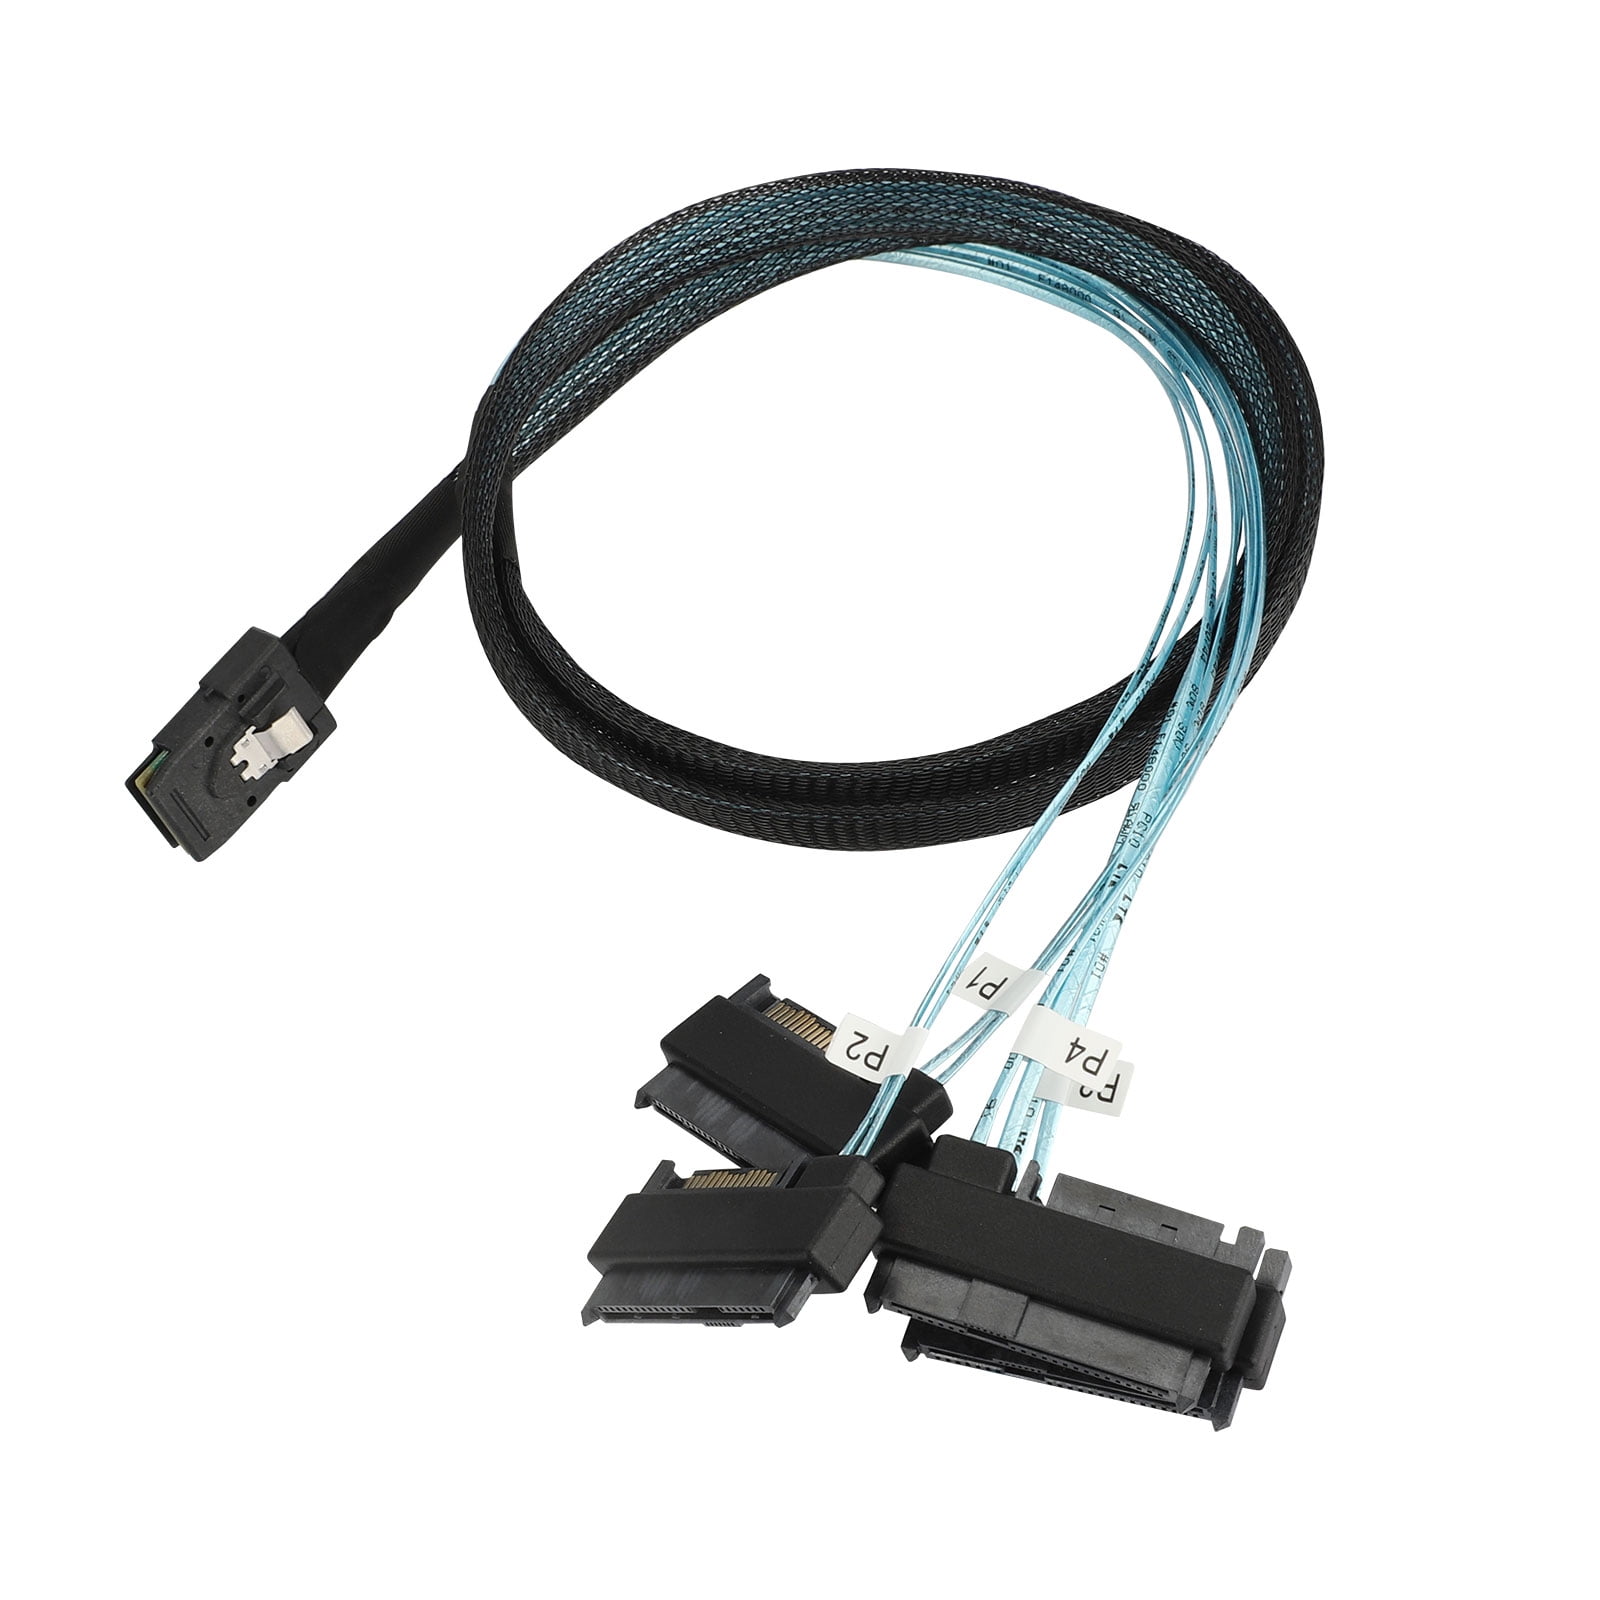 Mini SAS SFF-8087 36Pin to 4 SFF-8482 HDD with SATA Power Splitter Cable 1M 3FT 